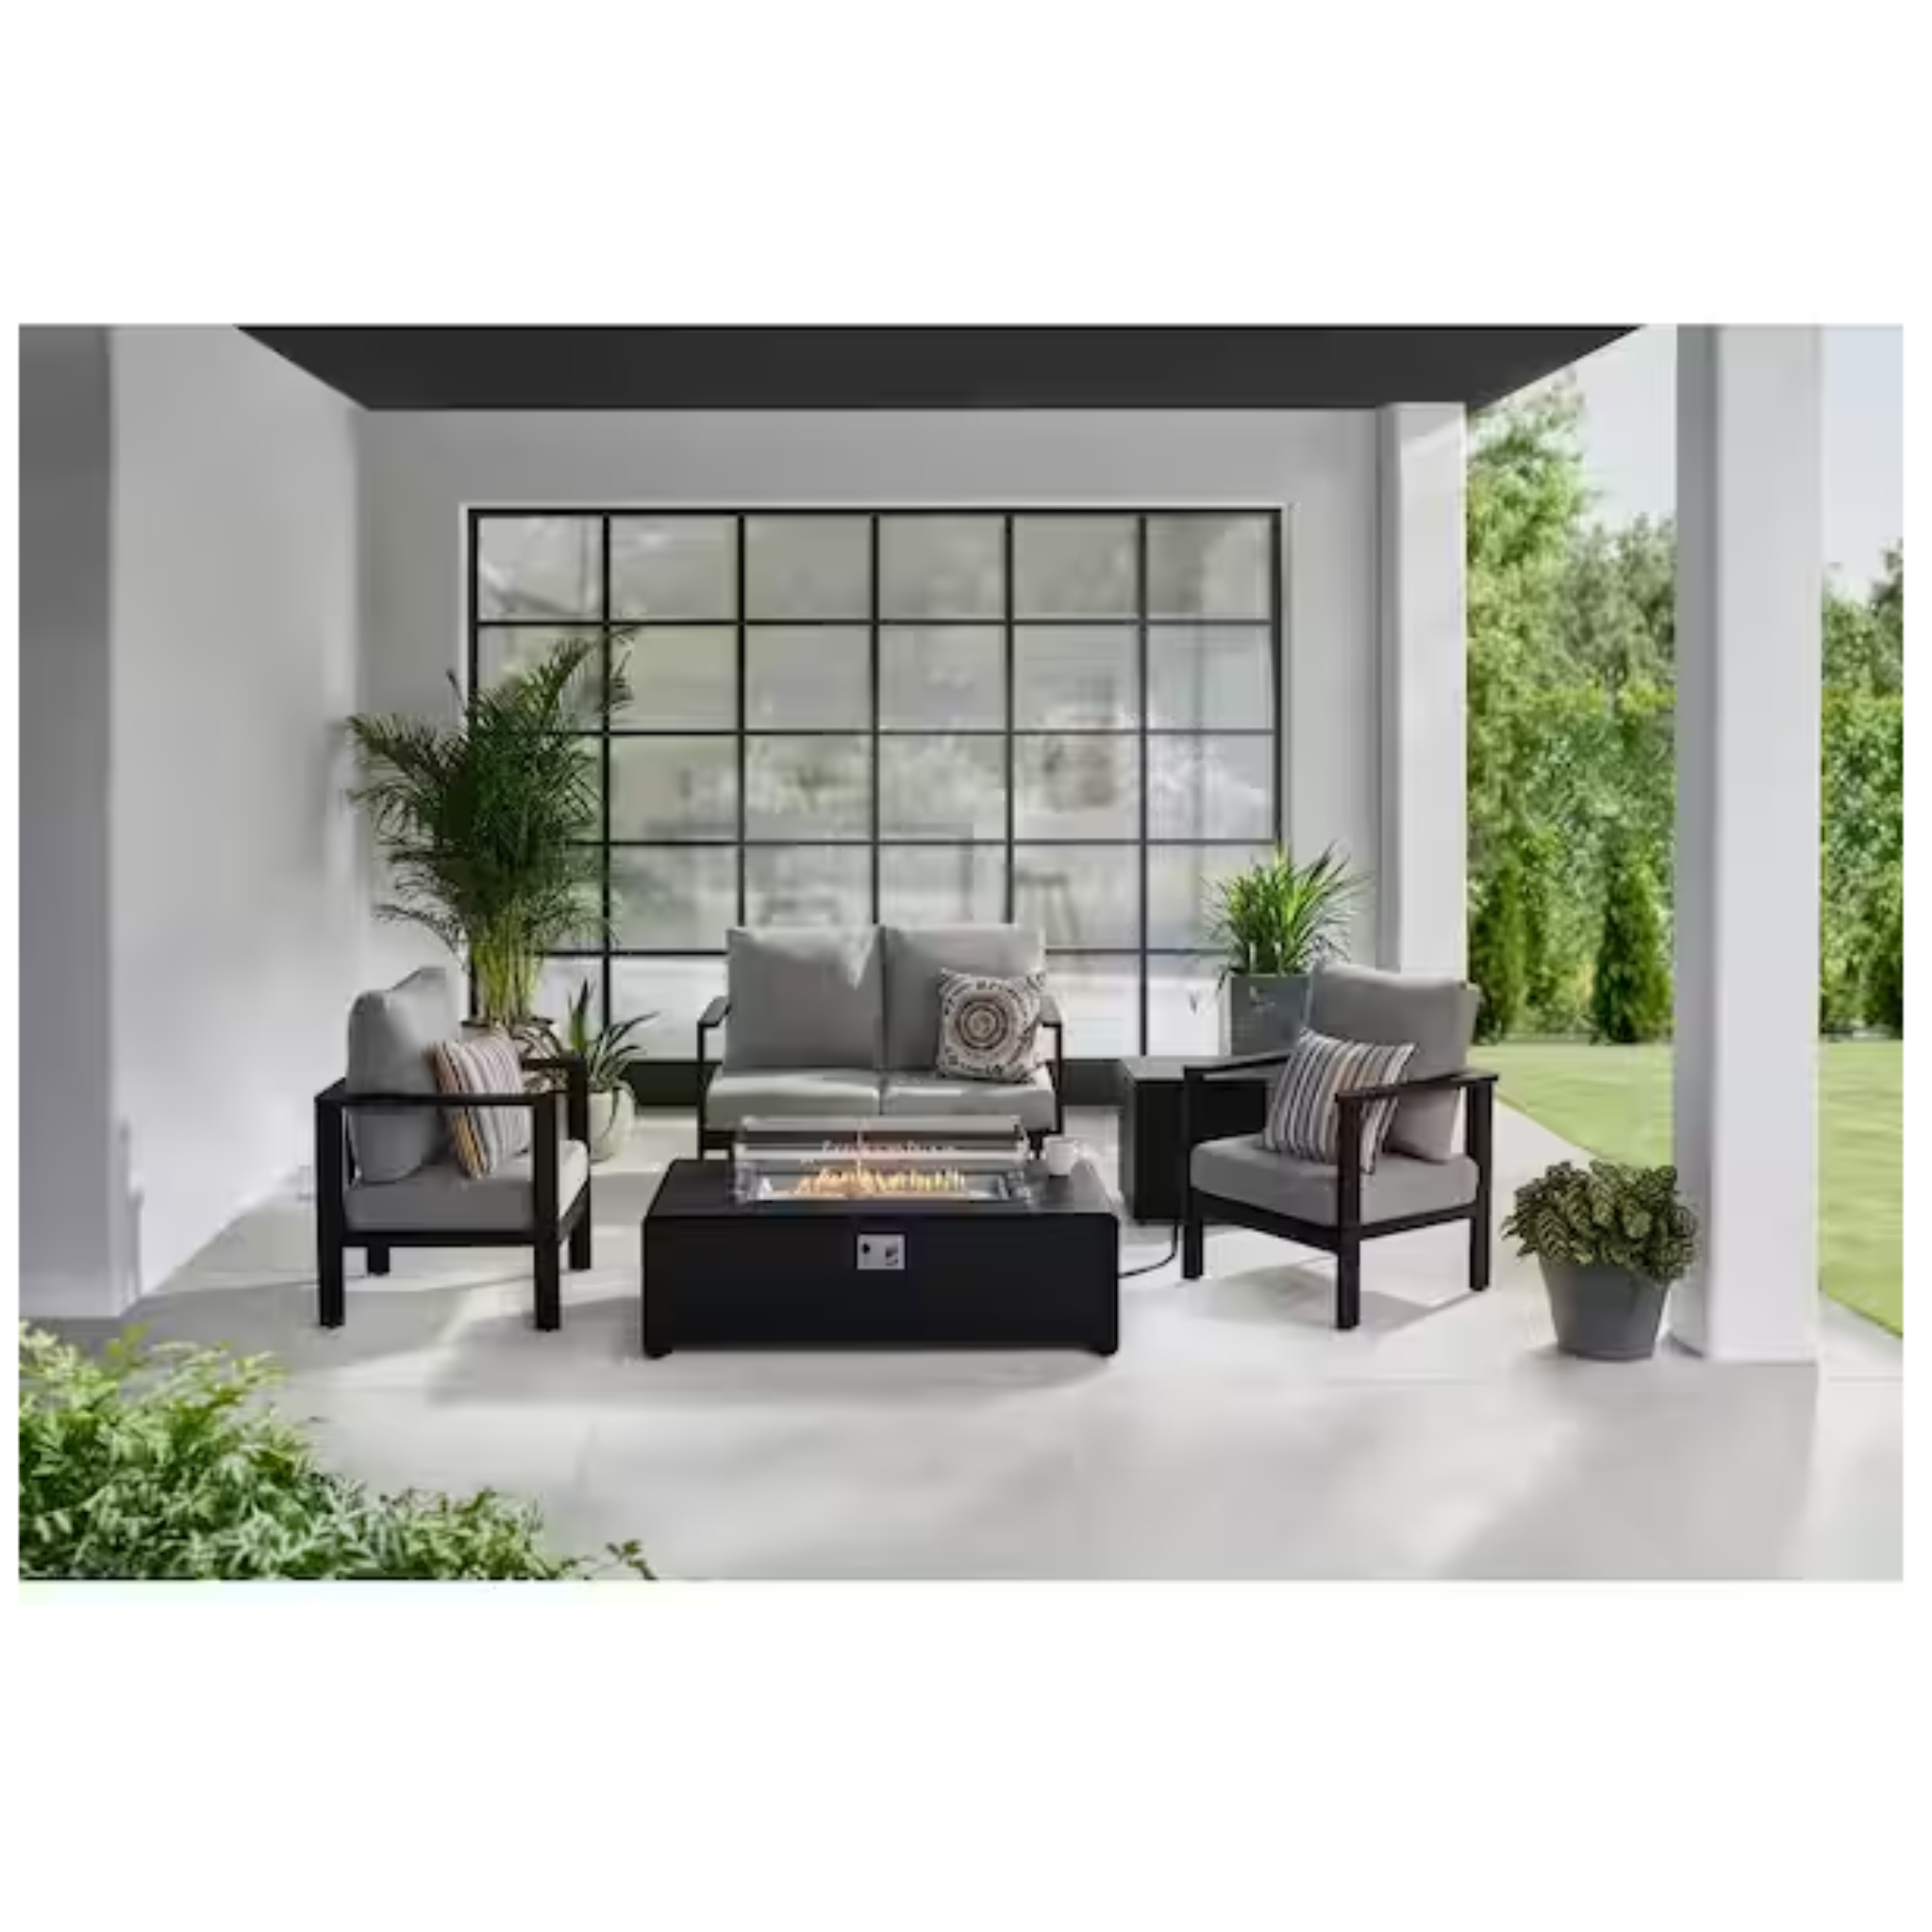 Up To 60% Off Patio Furniture